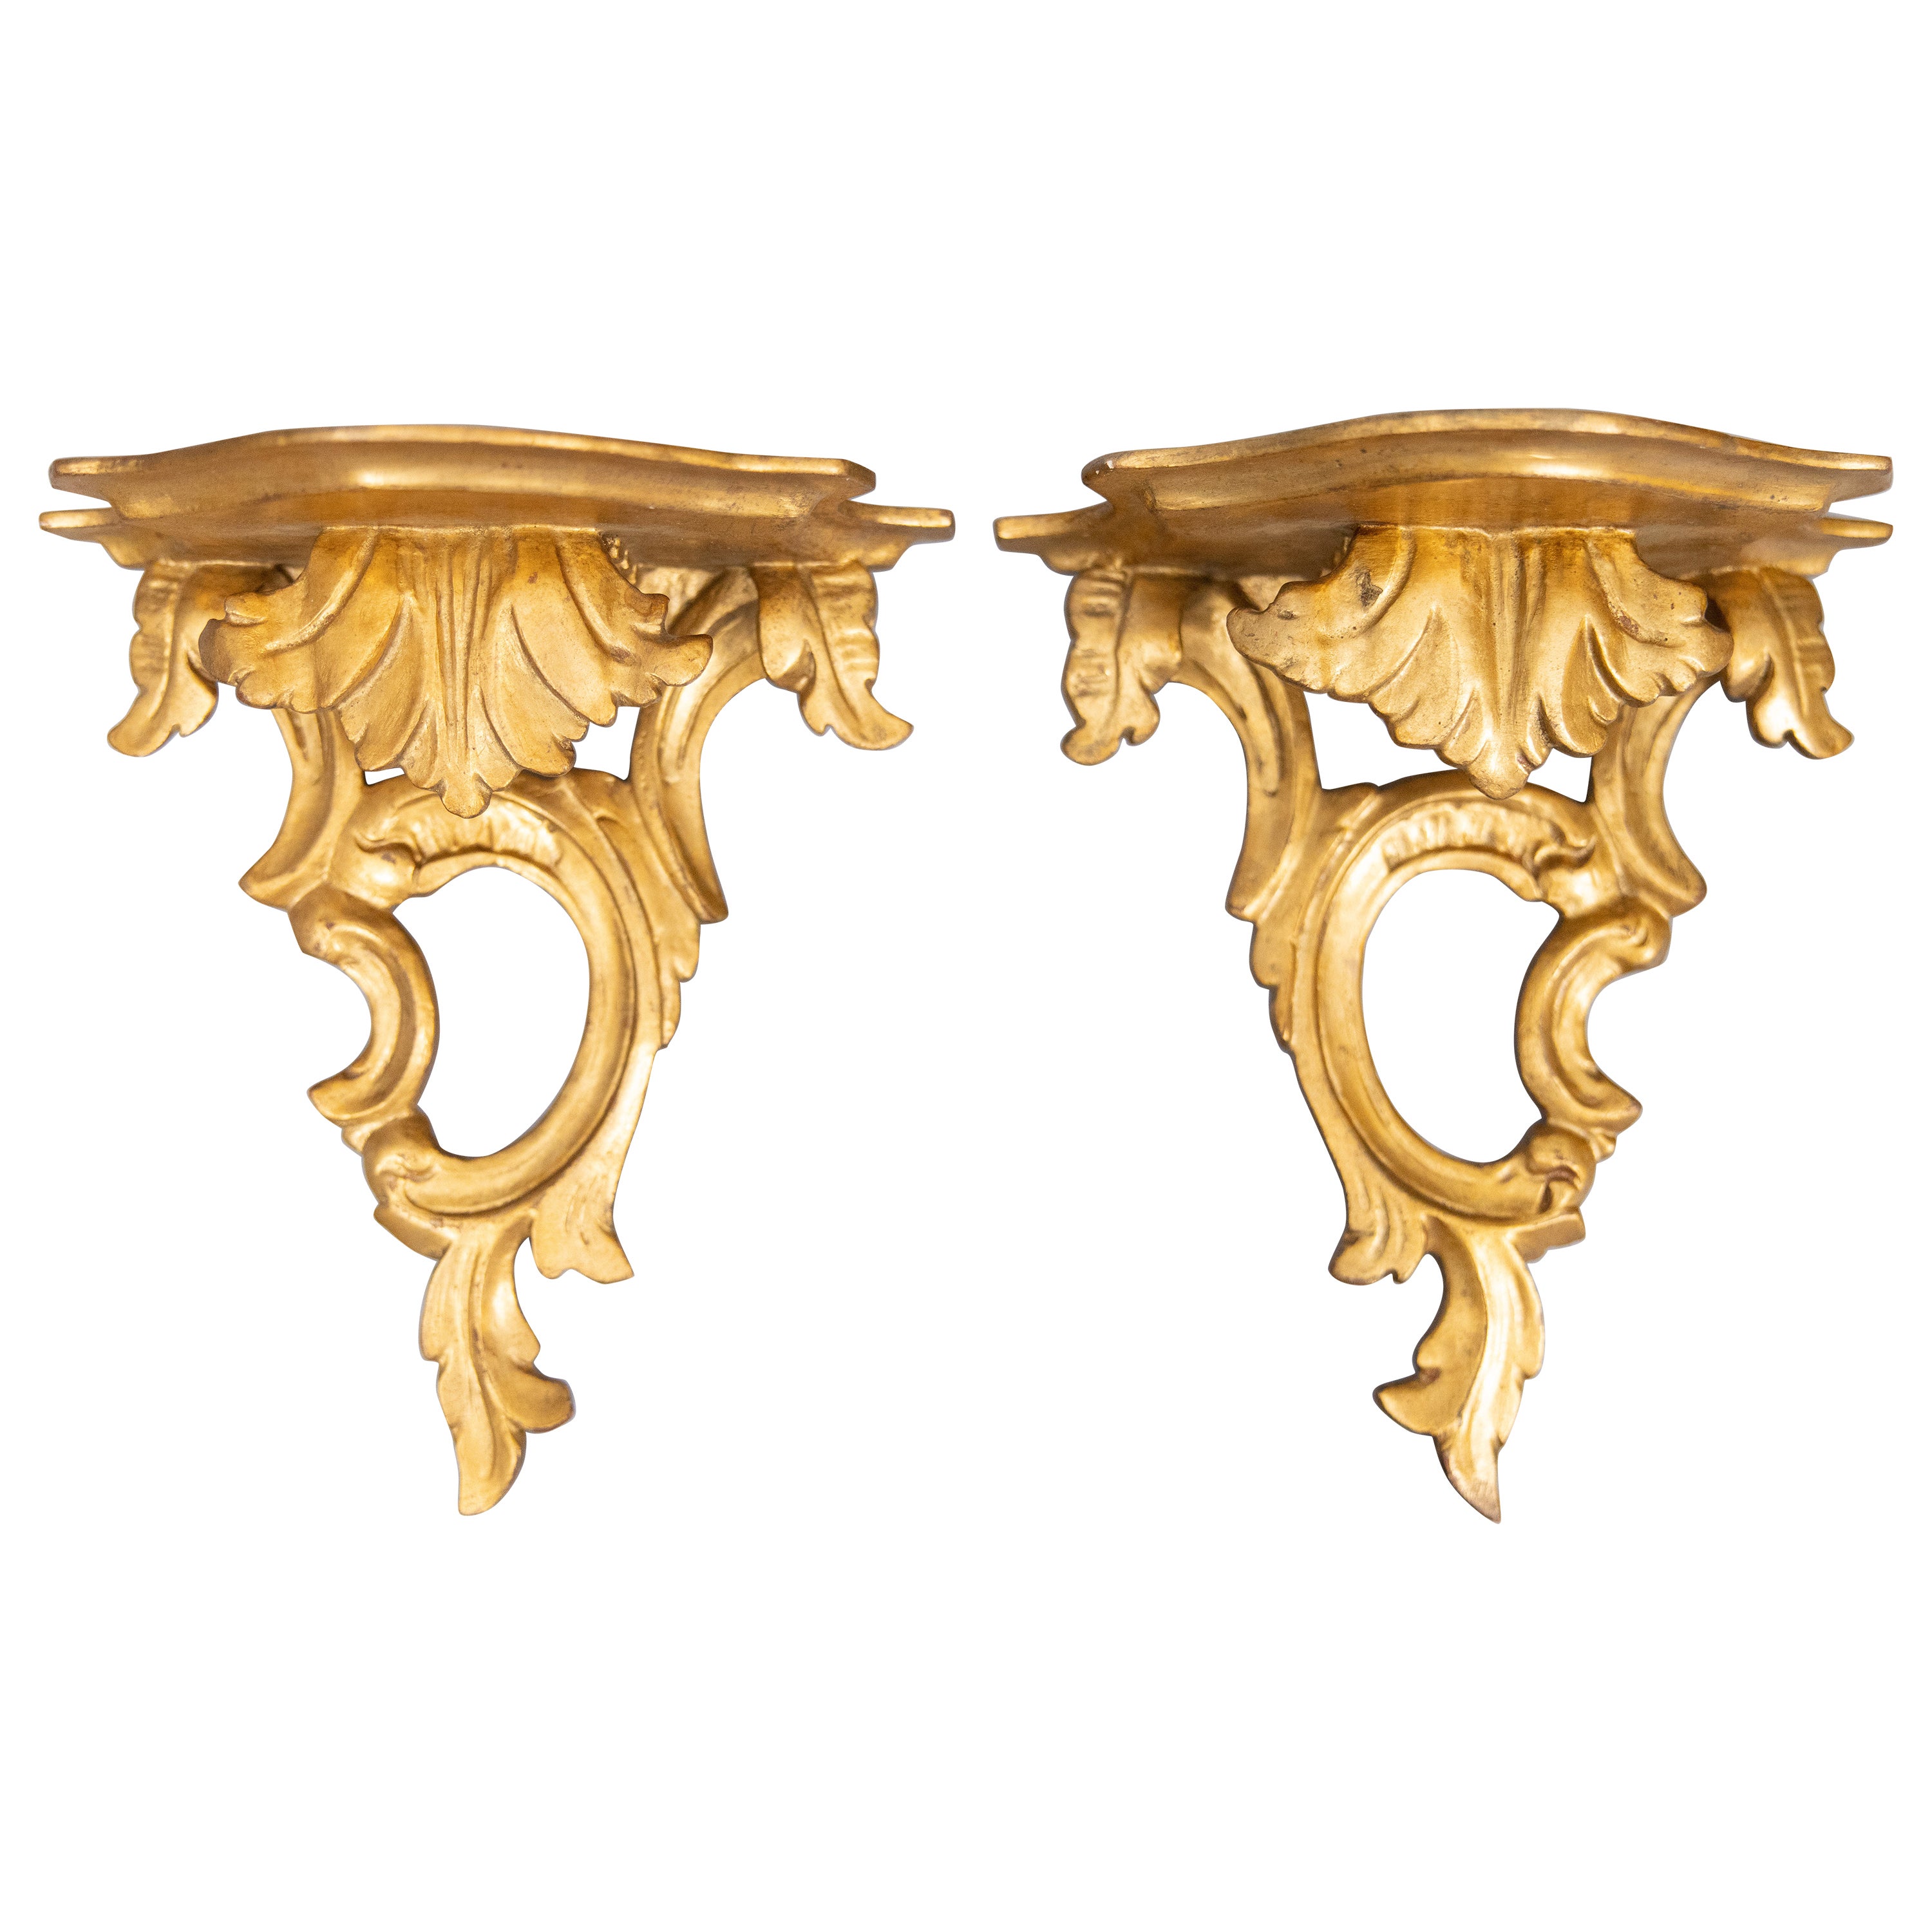 Pair of Mid-20th Century Italian Carved Giltwood Wall Brackets Shelves